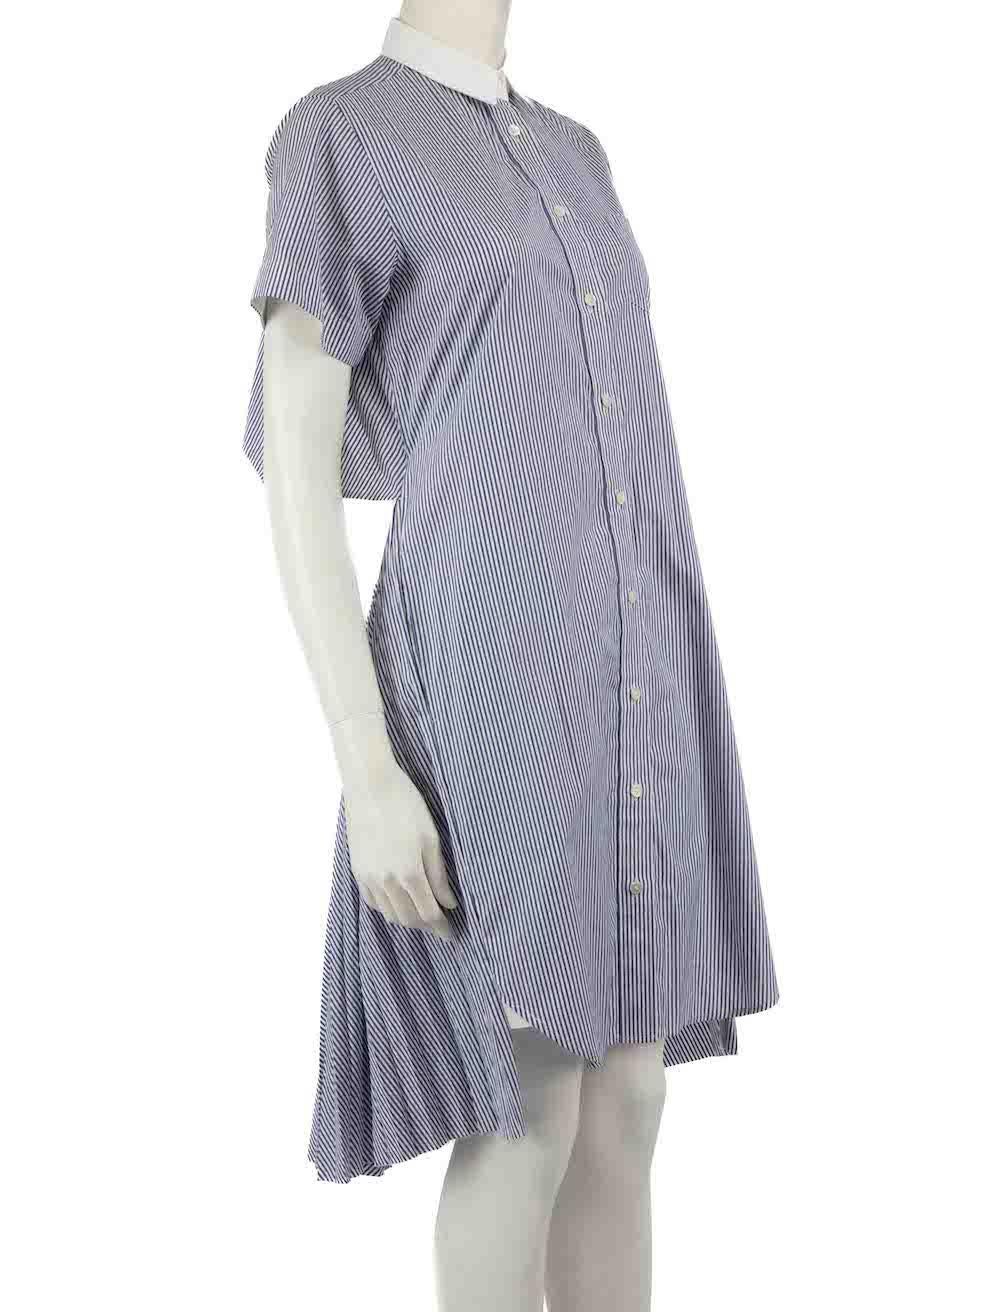 CONDITION is Very good. Minimal wear to dress is evident. Minimal wear to the rear neckline and ribbon waistband with discolouration on this used Sacai designer resale item.
 
 
 
 Details
 
 
 Blue
 
 Cotton
 
 Shirt dress
 
 Knee length
 
 Cut out